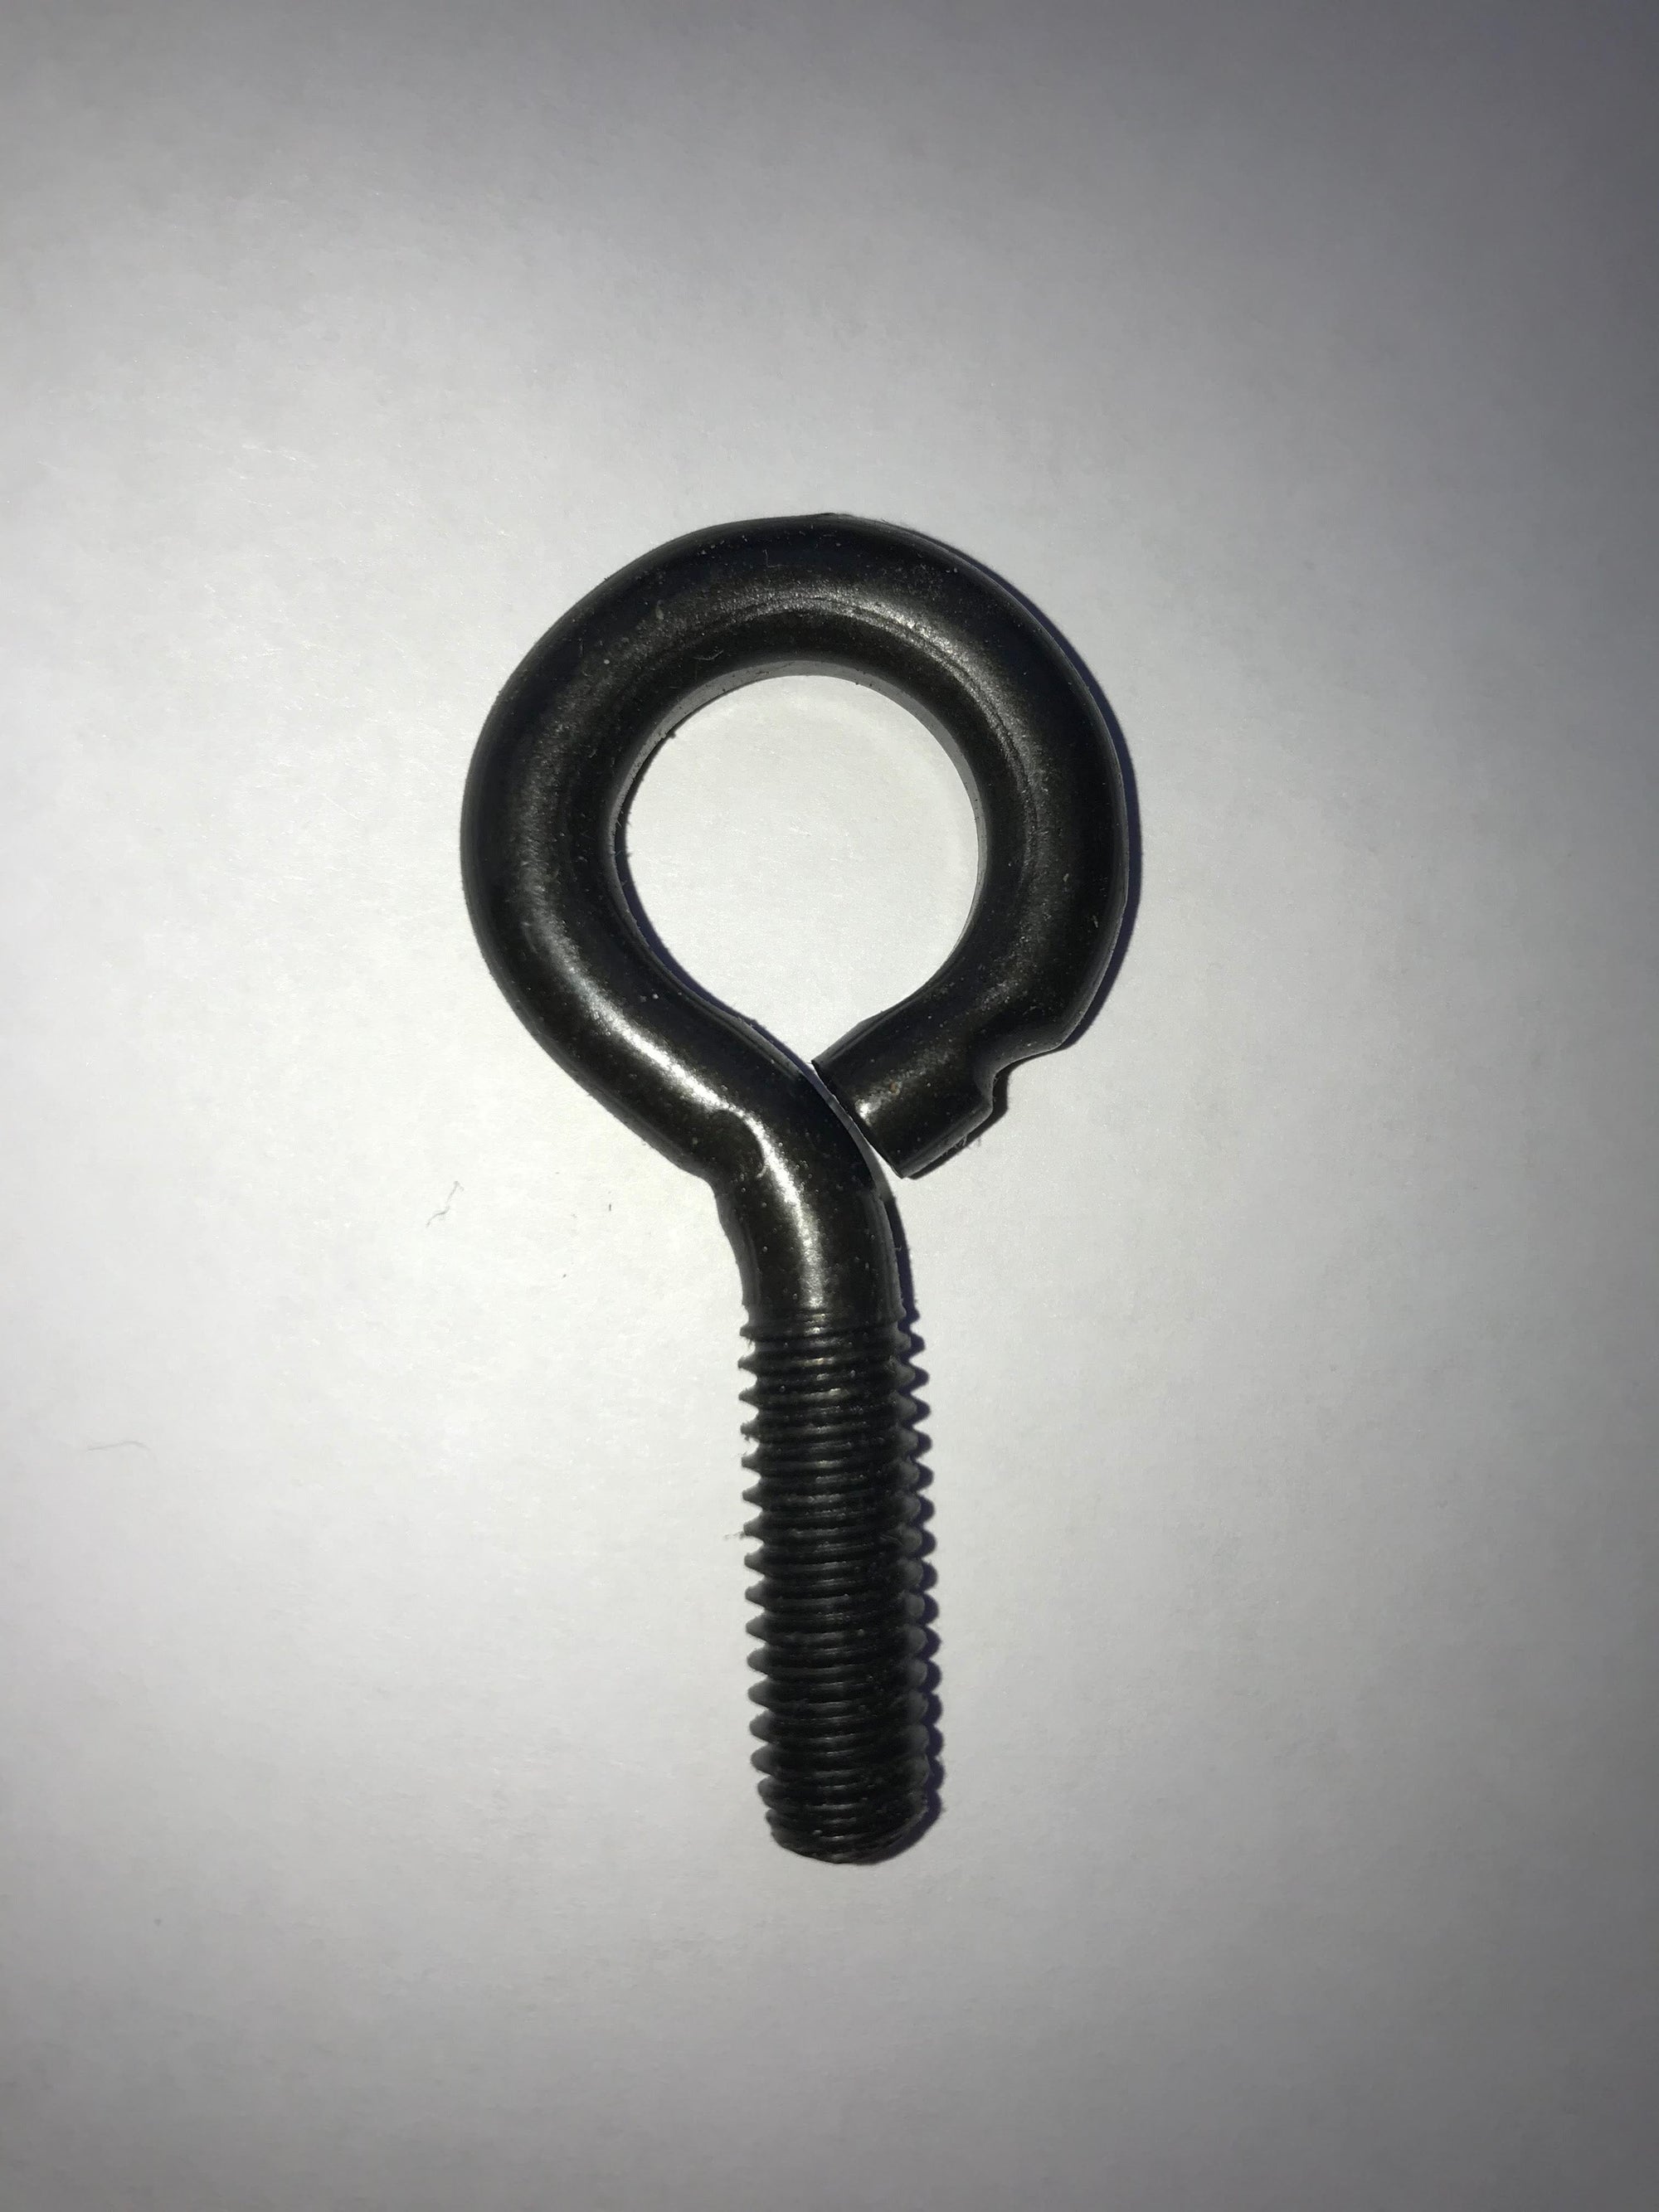 Black eyebolt hardware for fencing installation from Dog Proofer, image illustrates the screw thread and eye loop